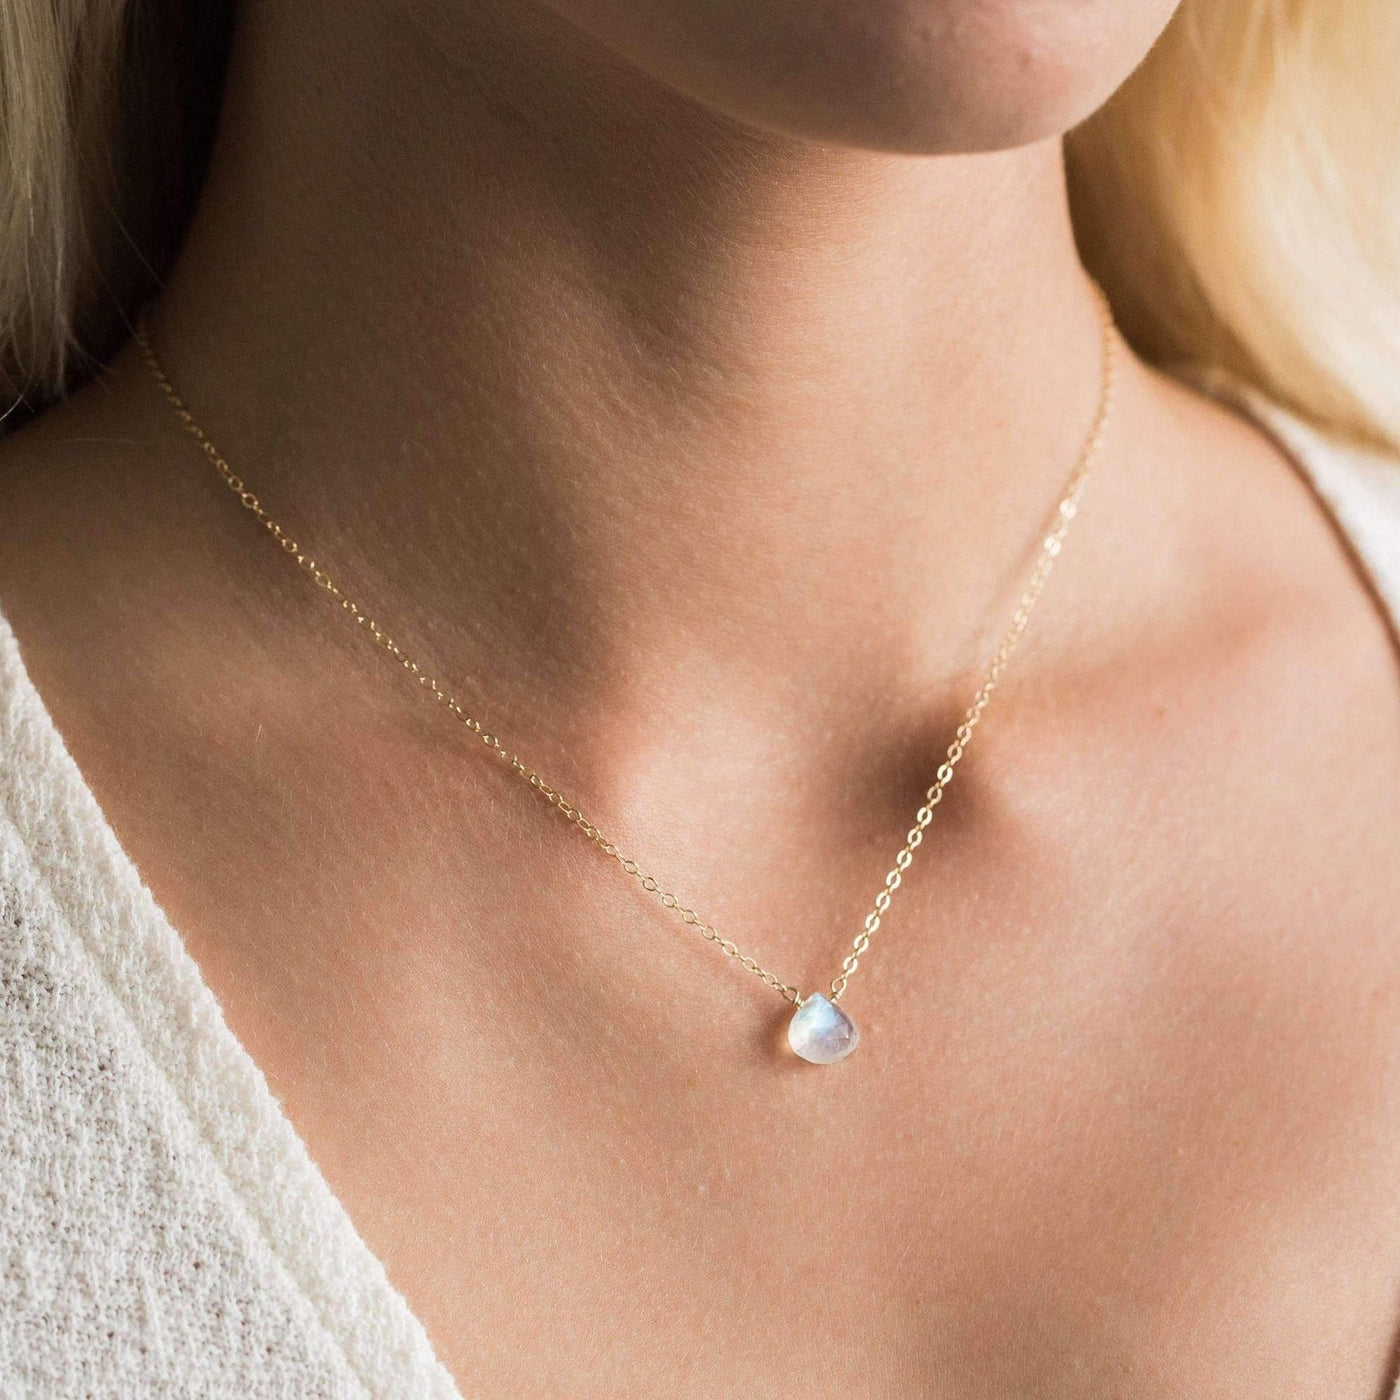 Dainty Moonstone Necklace | Simple & Dainty